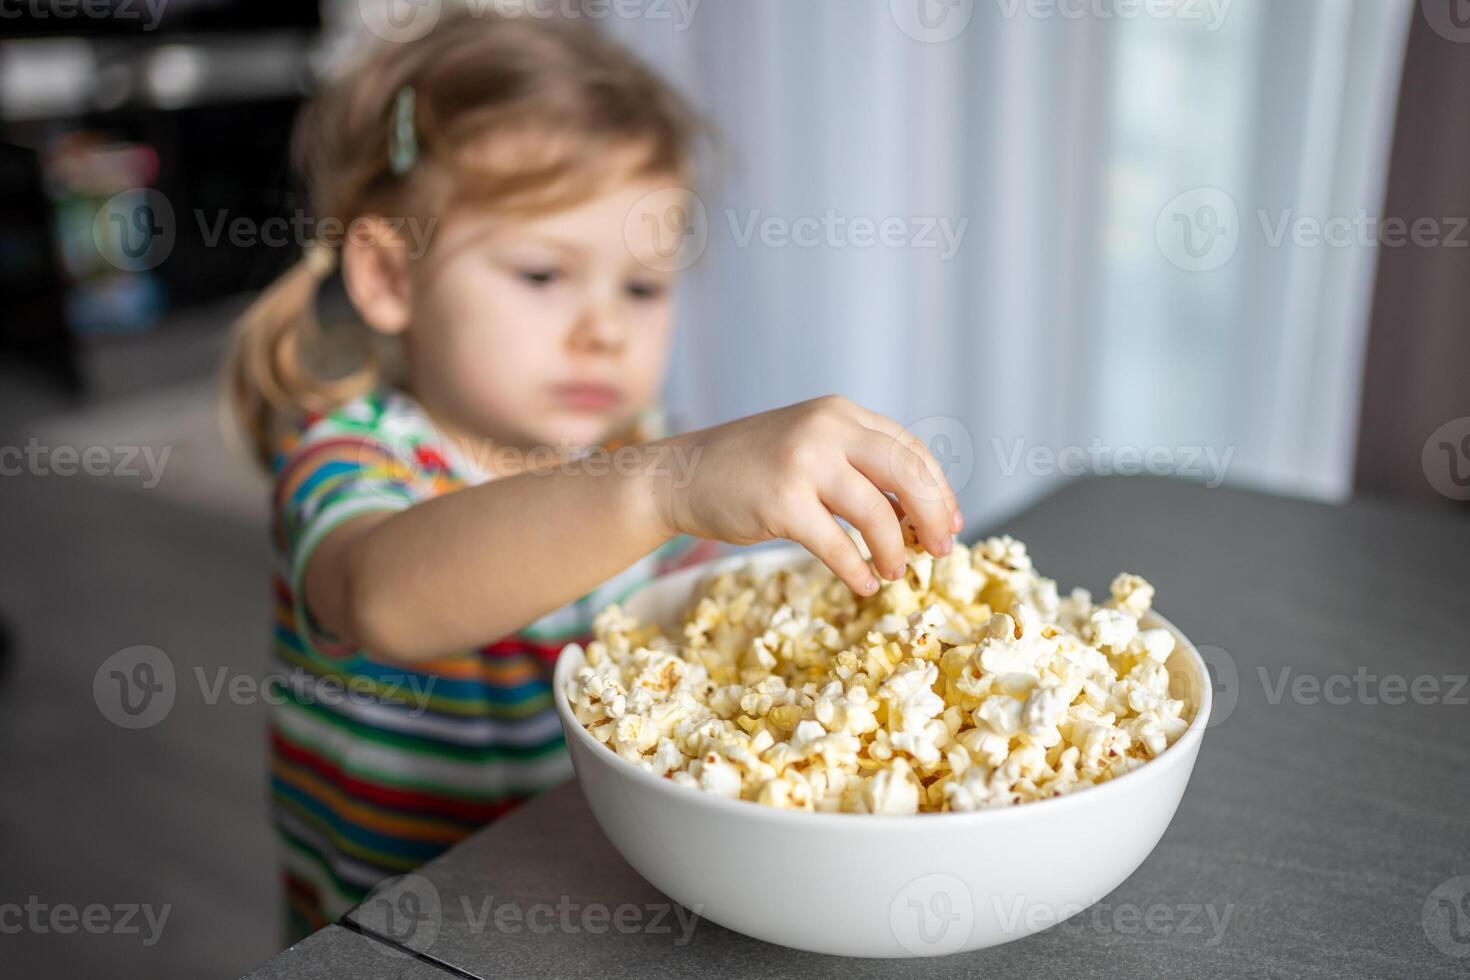 Little girl is eating popcorn in home kitchen. Focus on hand taking popcorn photo